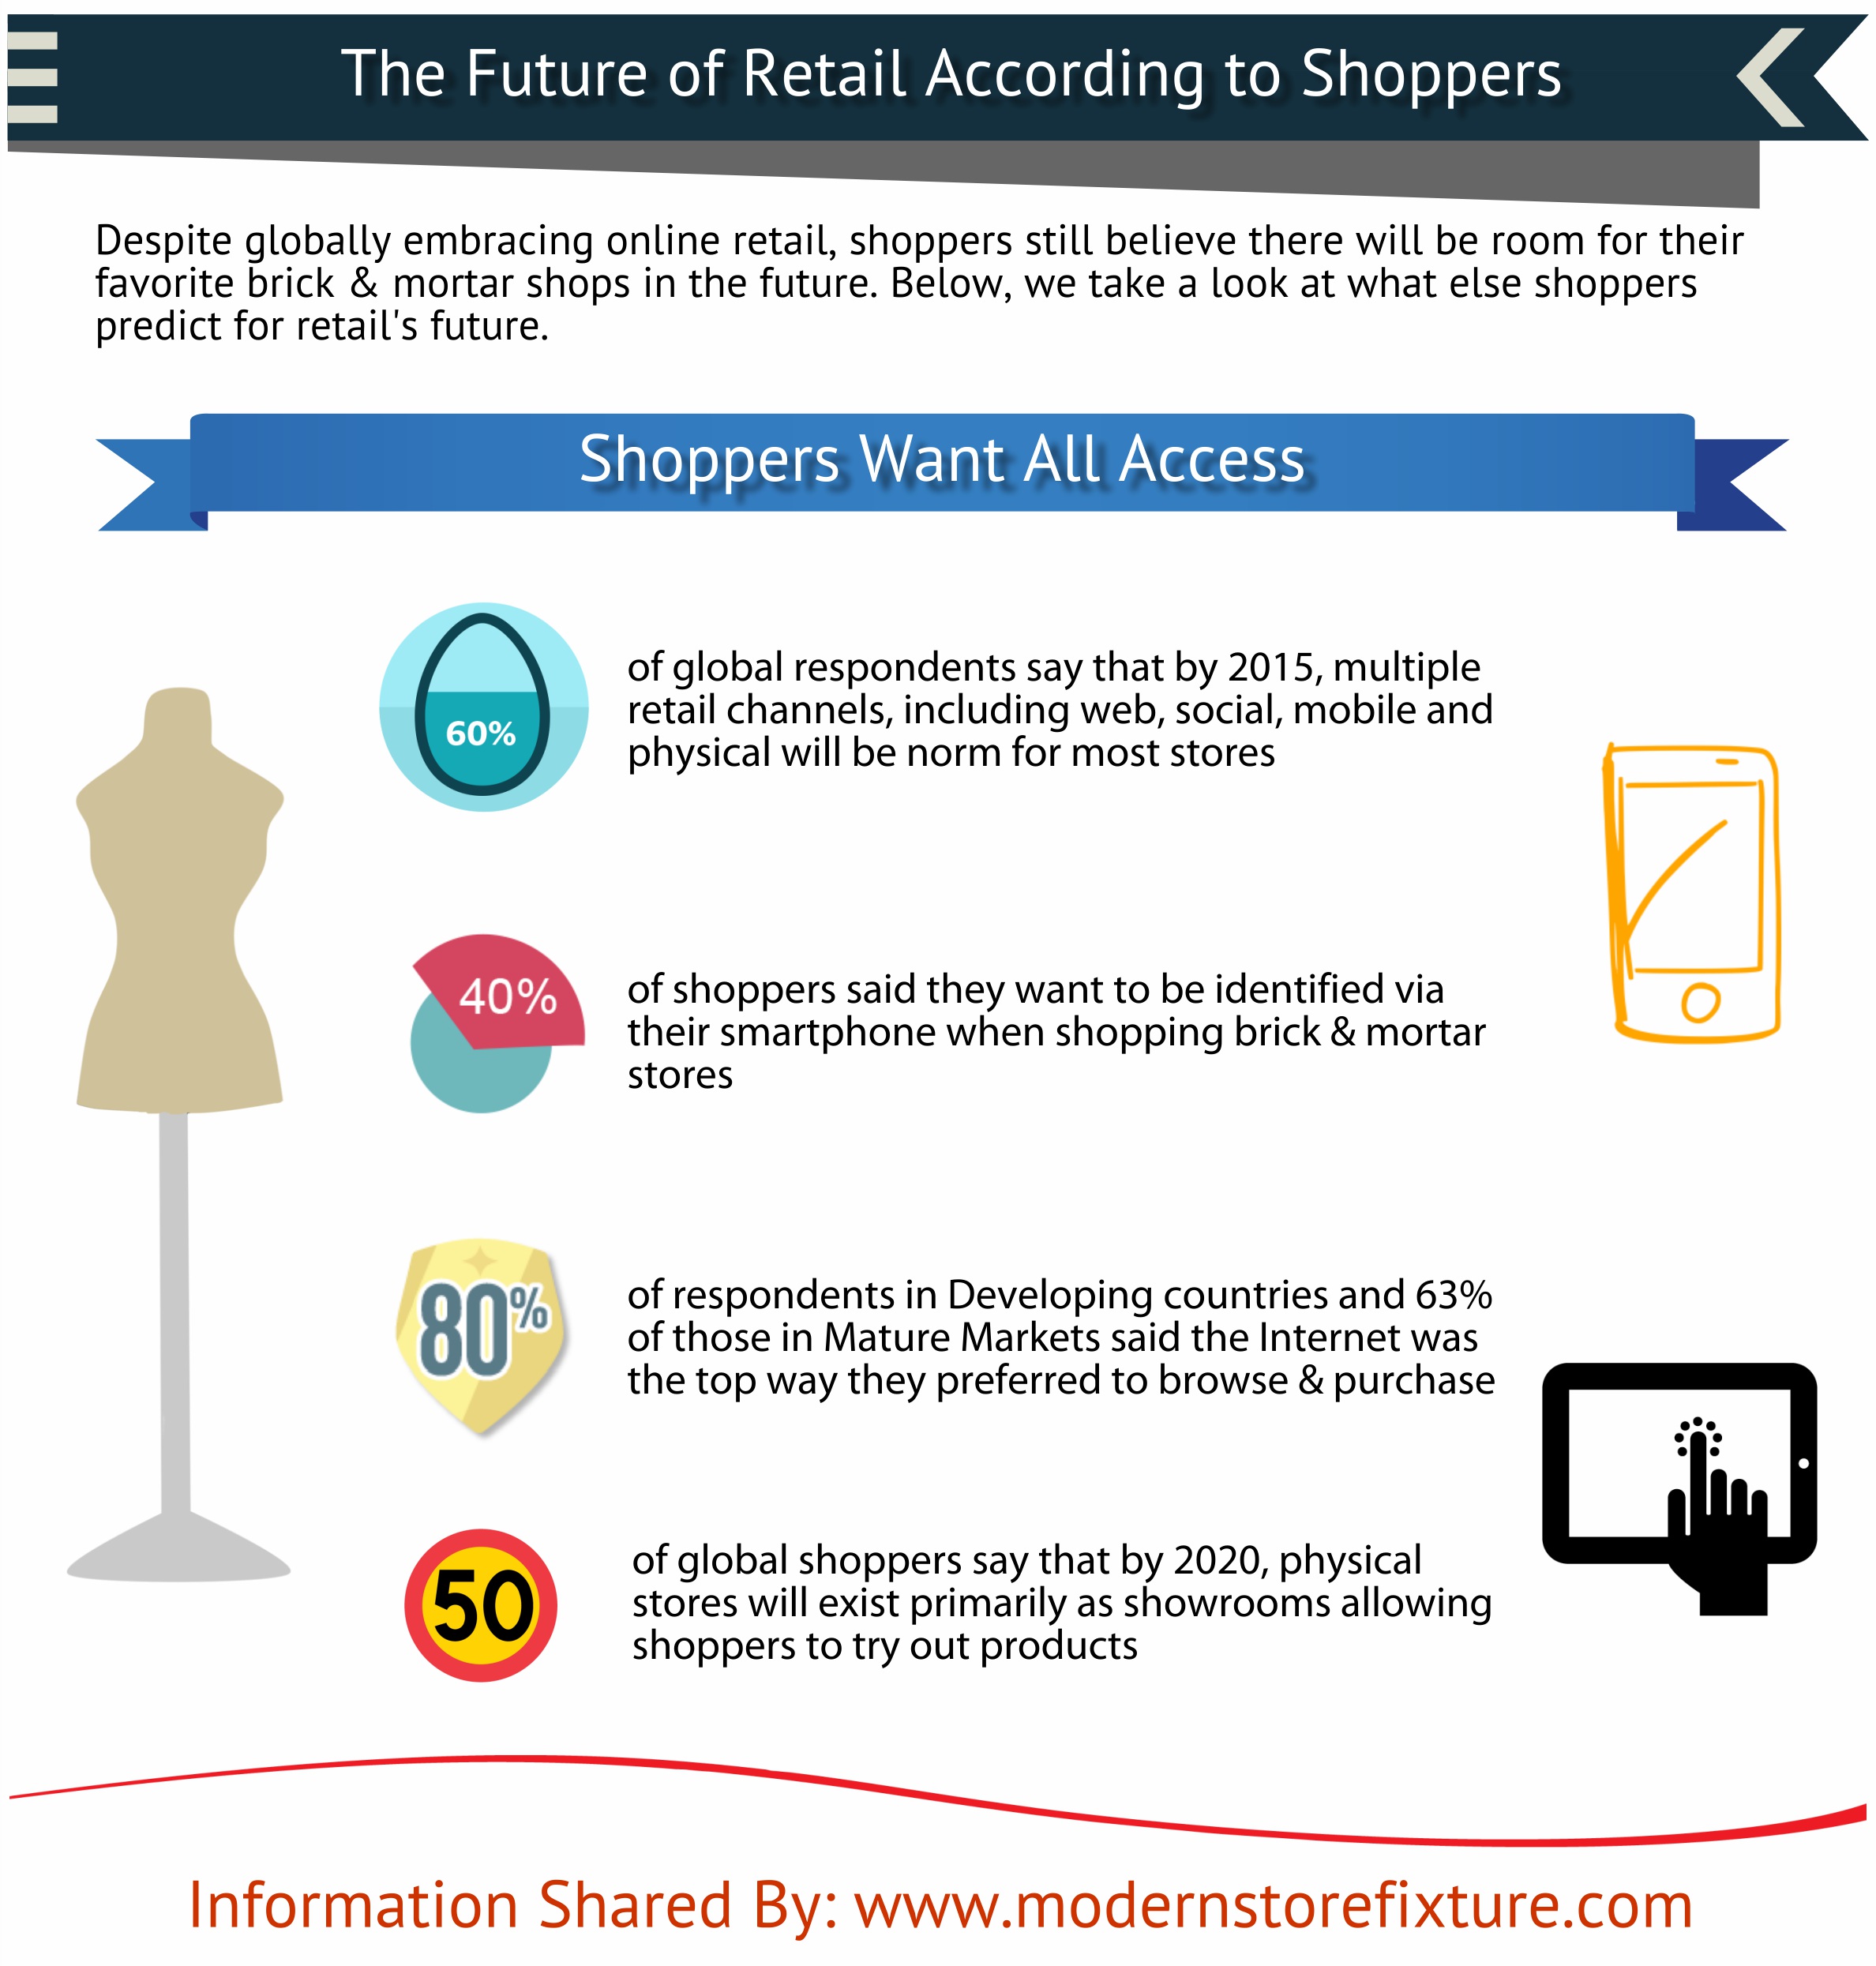 The Future of Retail According to Shoppers | Visual.ly